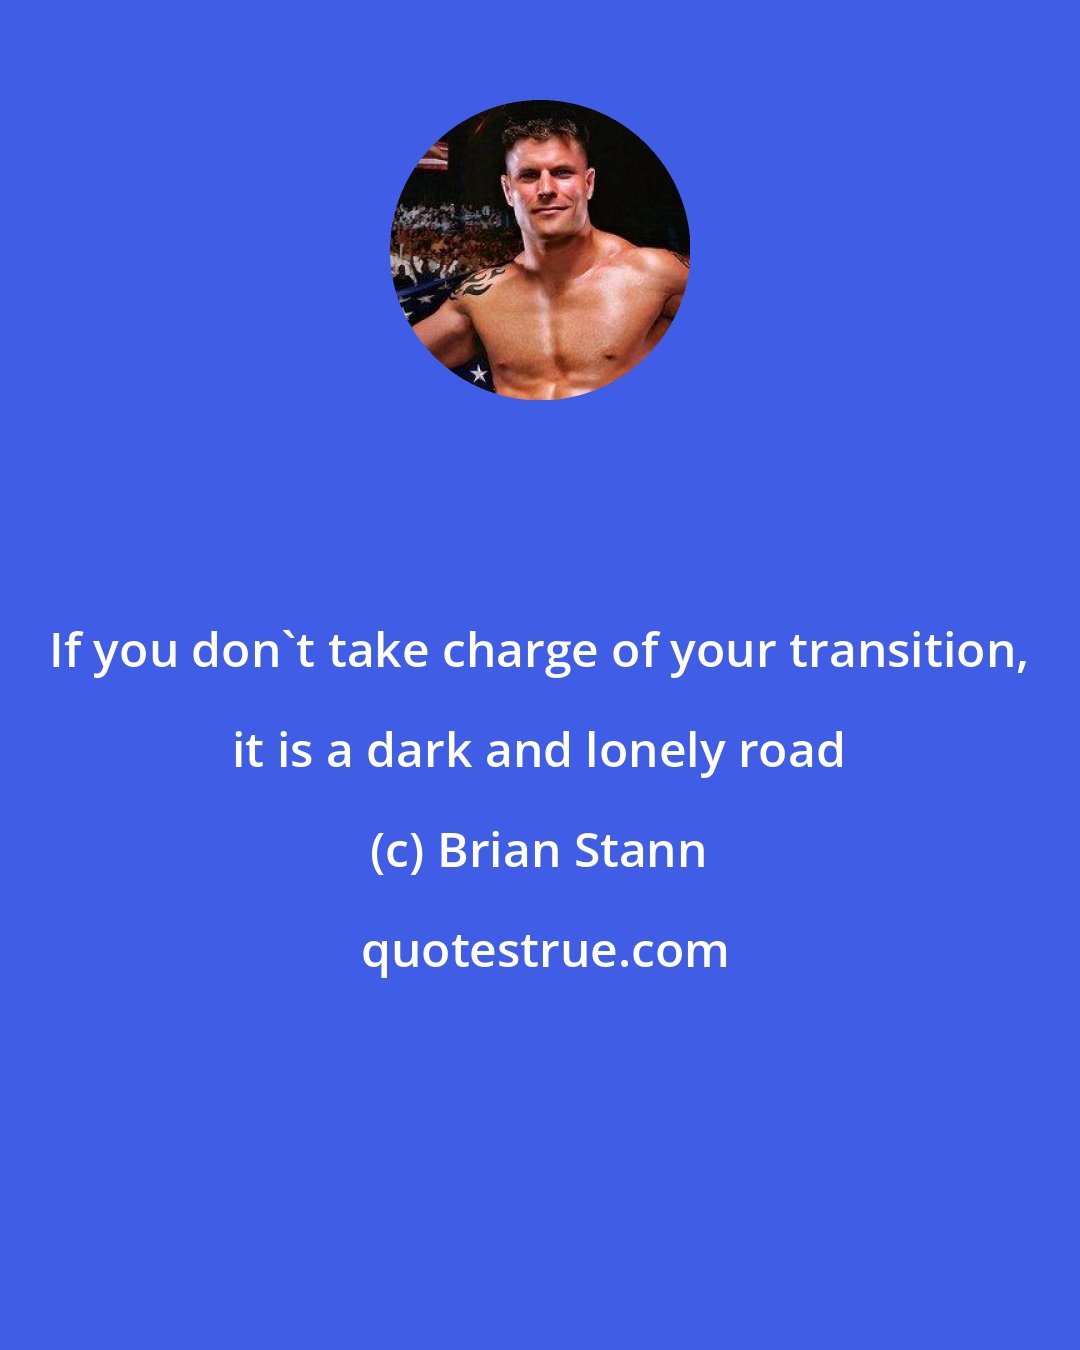 Brian Stann: If you don't take charge of your transition, it is a dark and lonely road